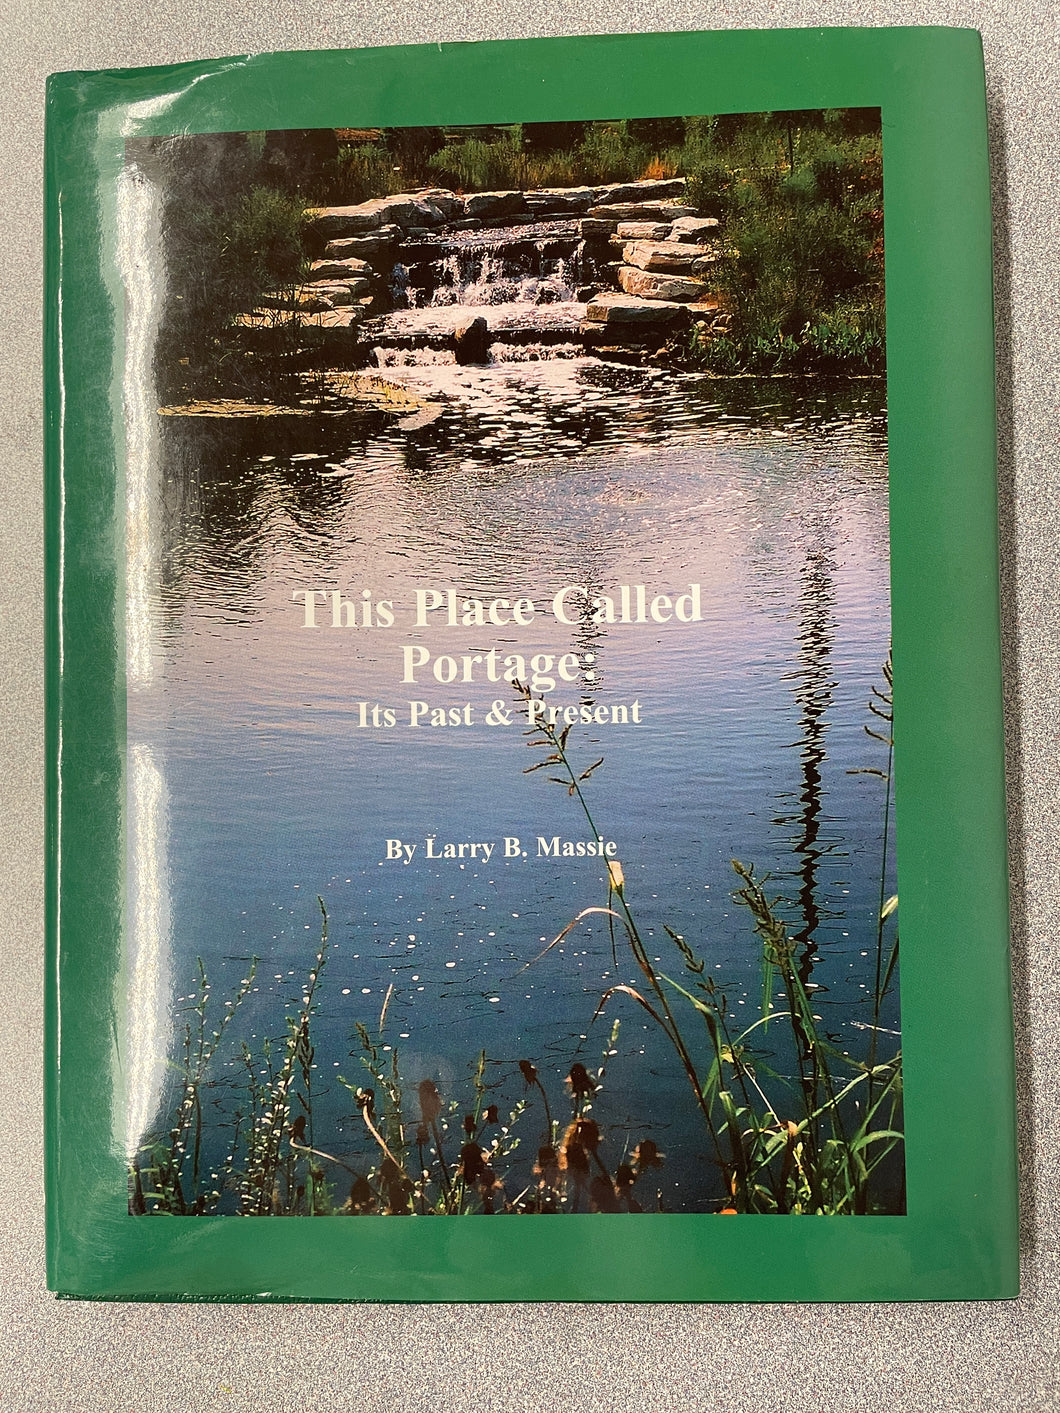 MI  This Place Called Portage:  Its Past & Present, Massie, Larry B. [2006] N 1/24